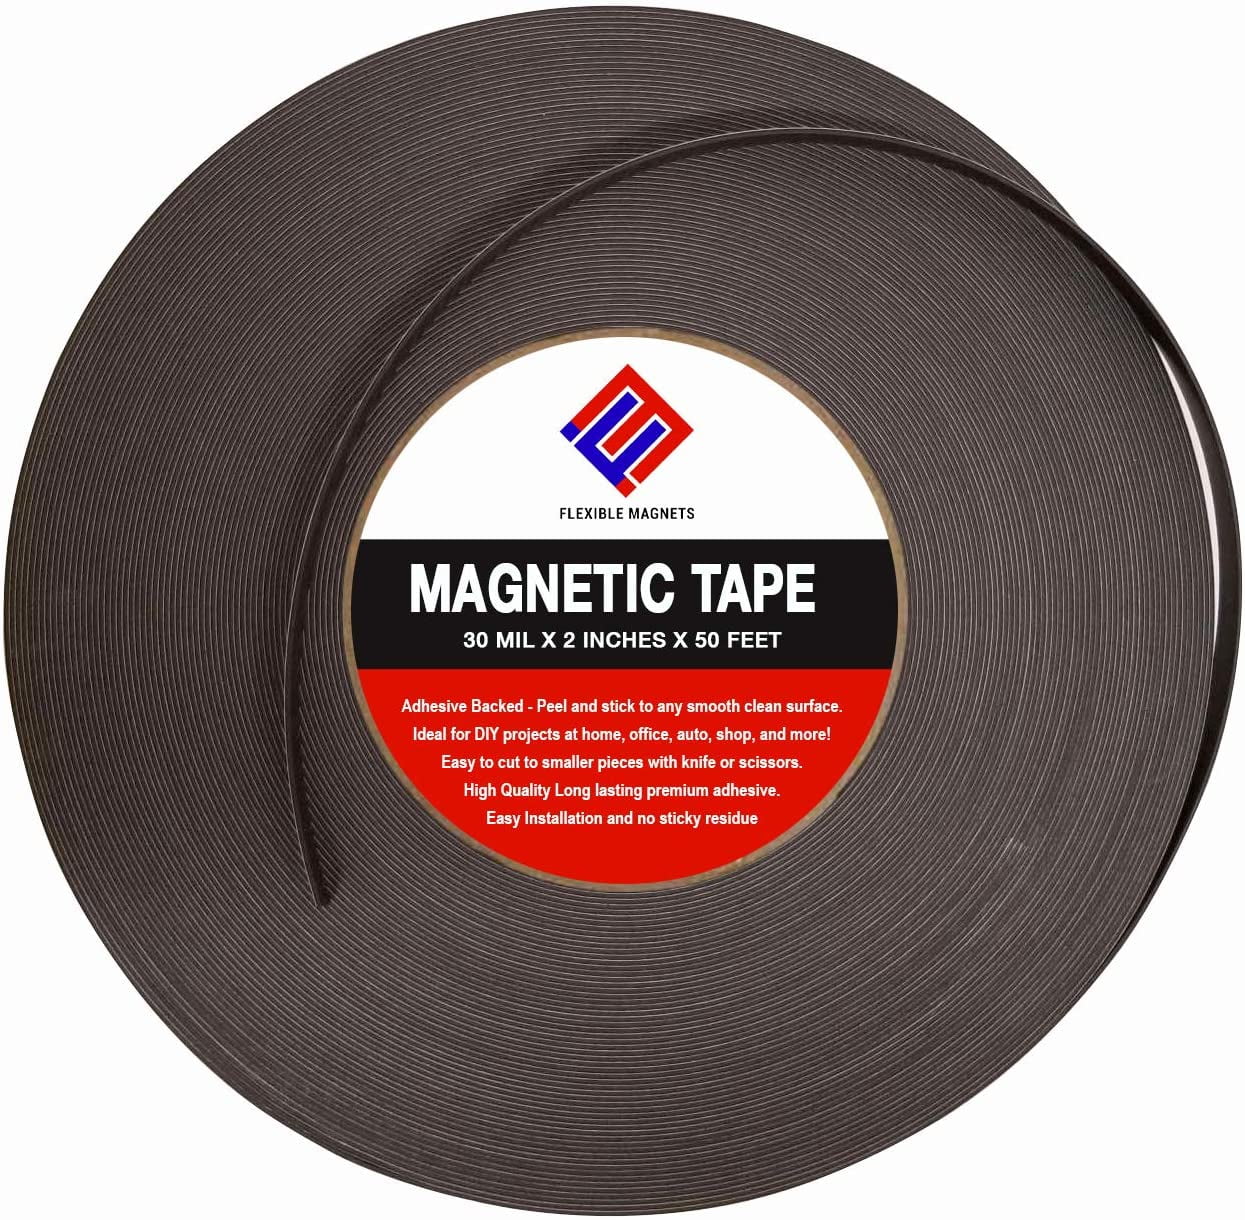 Magnetic Tape Roll with Adhesive Backing - Strip of Peel and Stick Magnets  - Super Strong & Sticky by Flexible Magnets (30 mil x 2 inch x 50 feet)